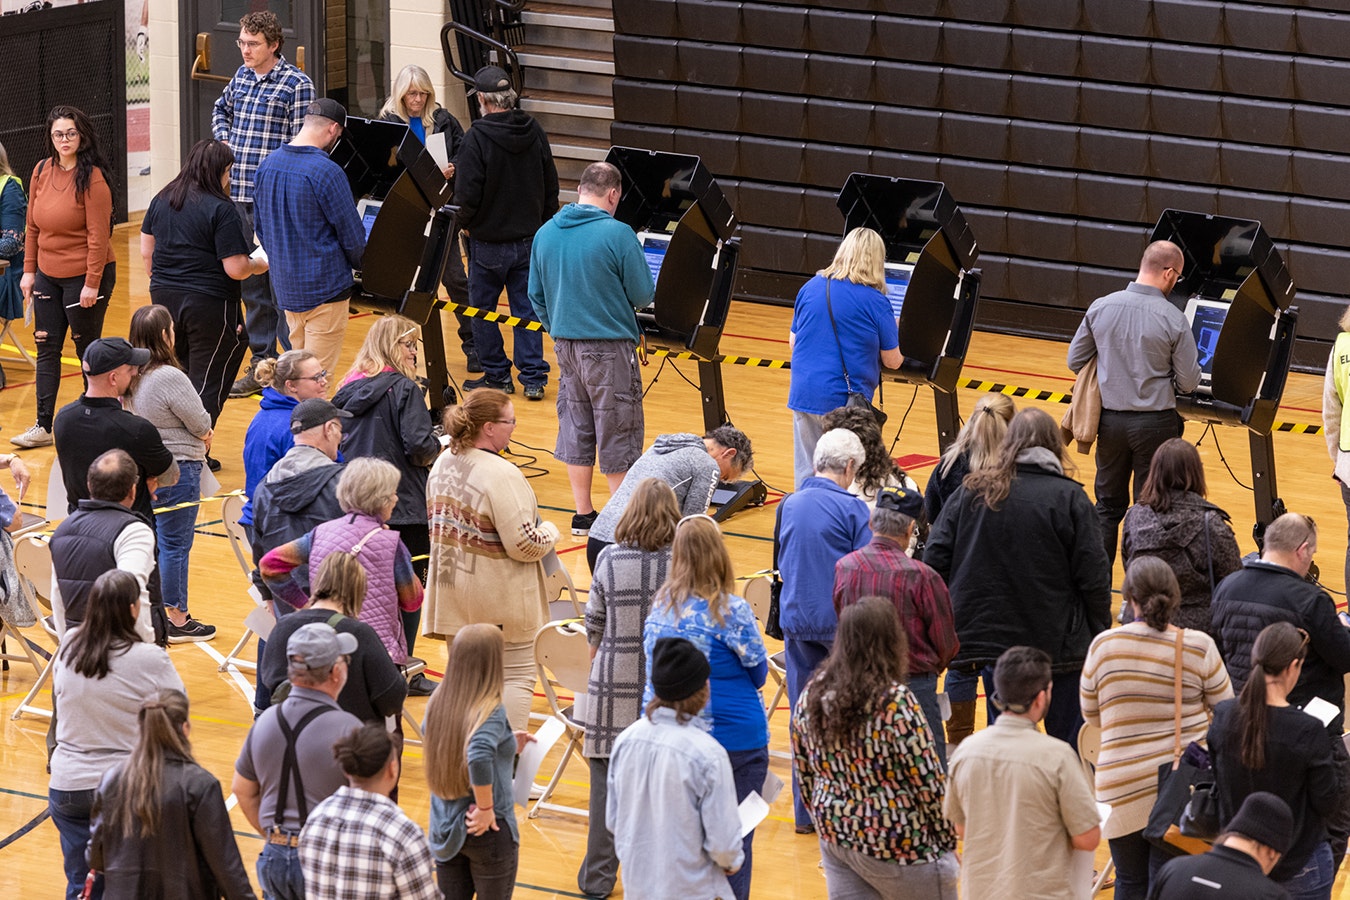 Long lines of people wait to vote in Cheyenne during the 2022 general election.